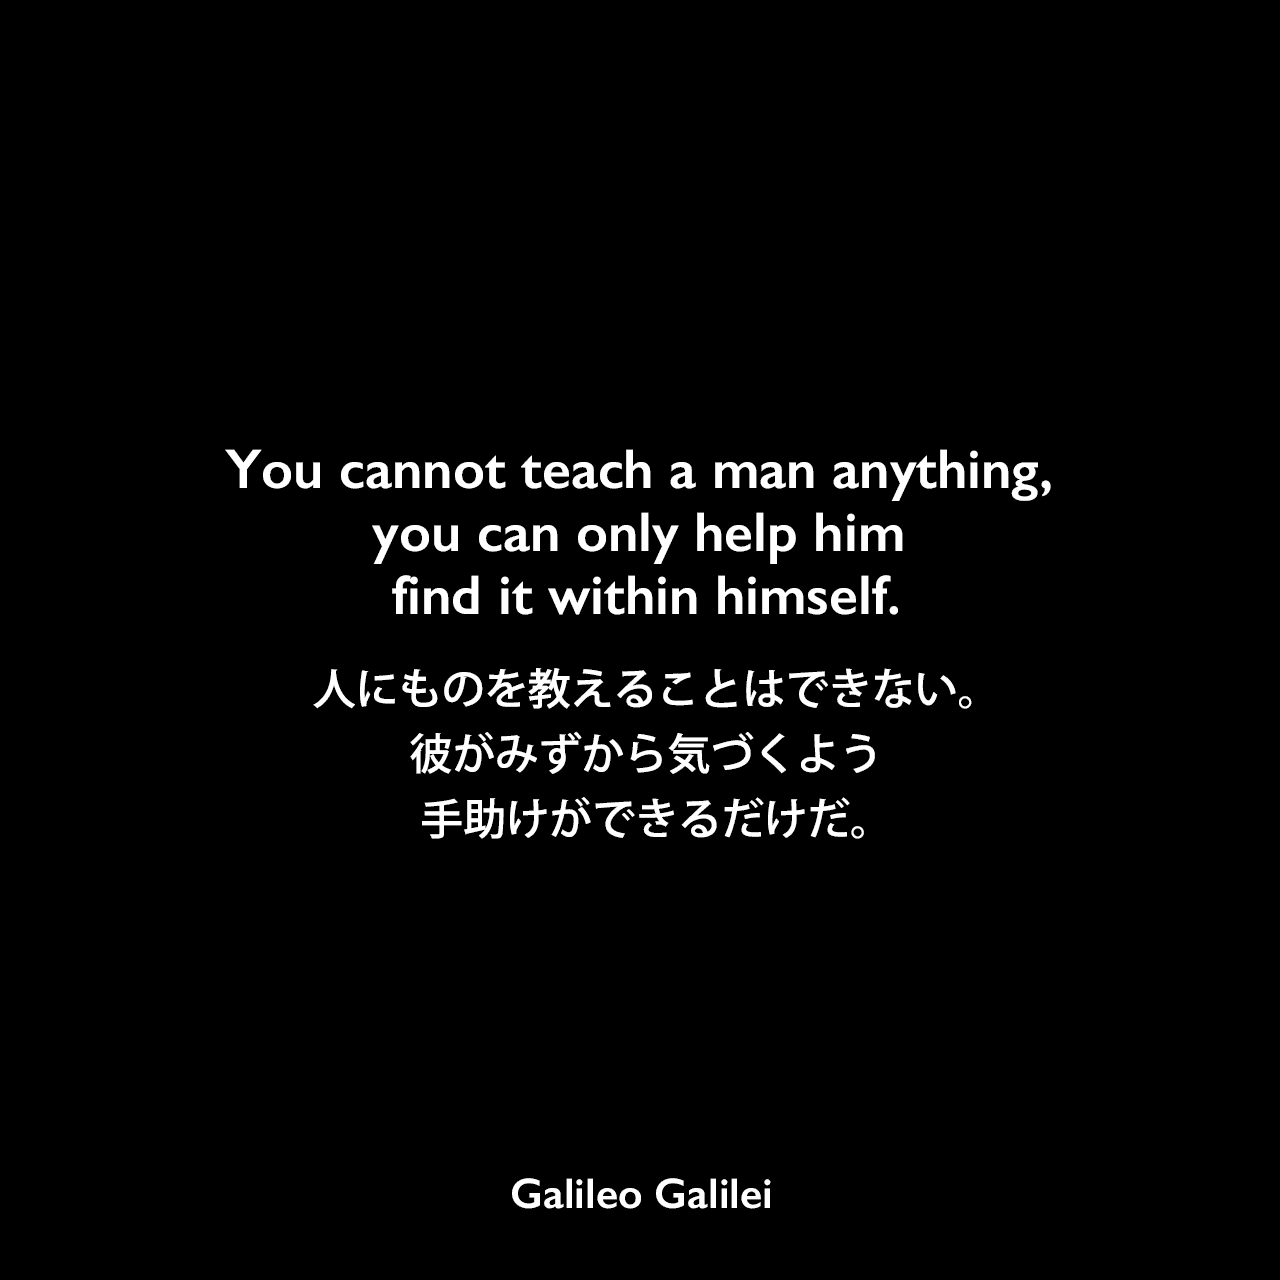 You cannot teach a man anything, you can only help him find it within himself.人にものを教えることはできない。 彼がみずから気づくよう手助けができるだけだ。